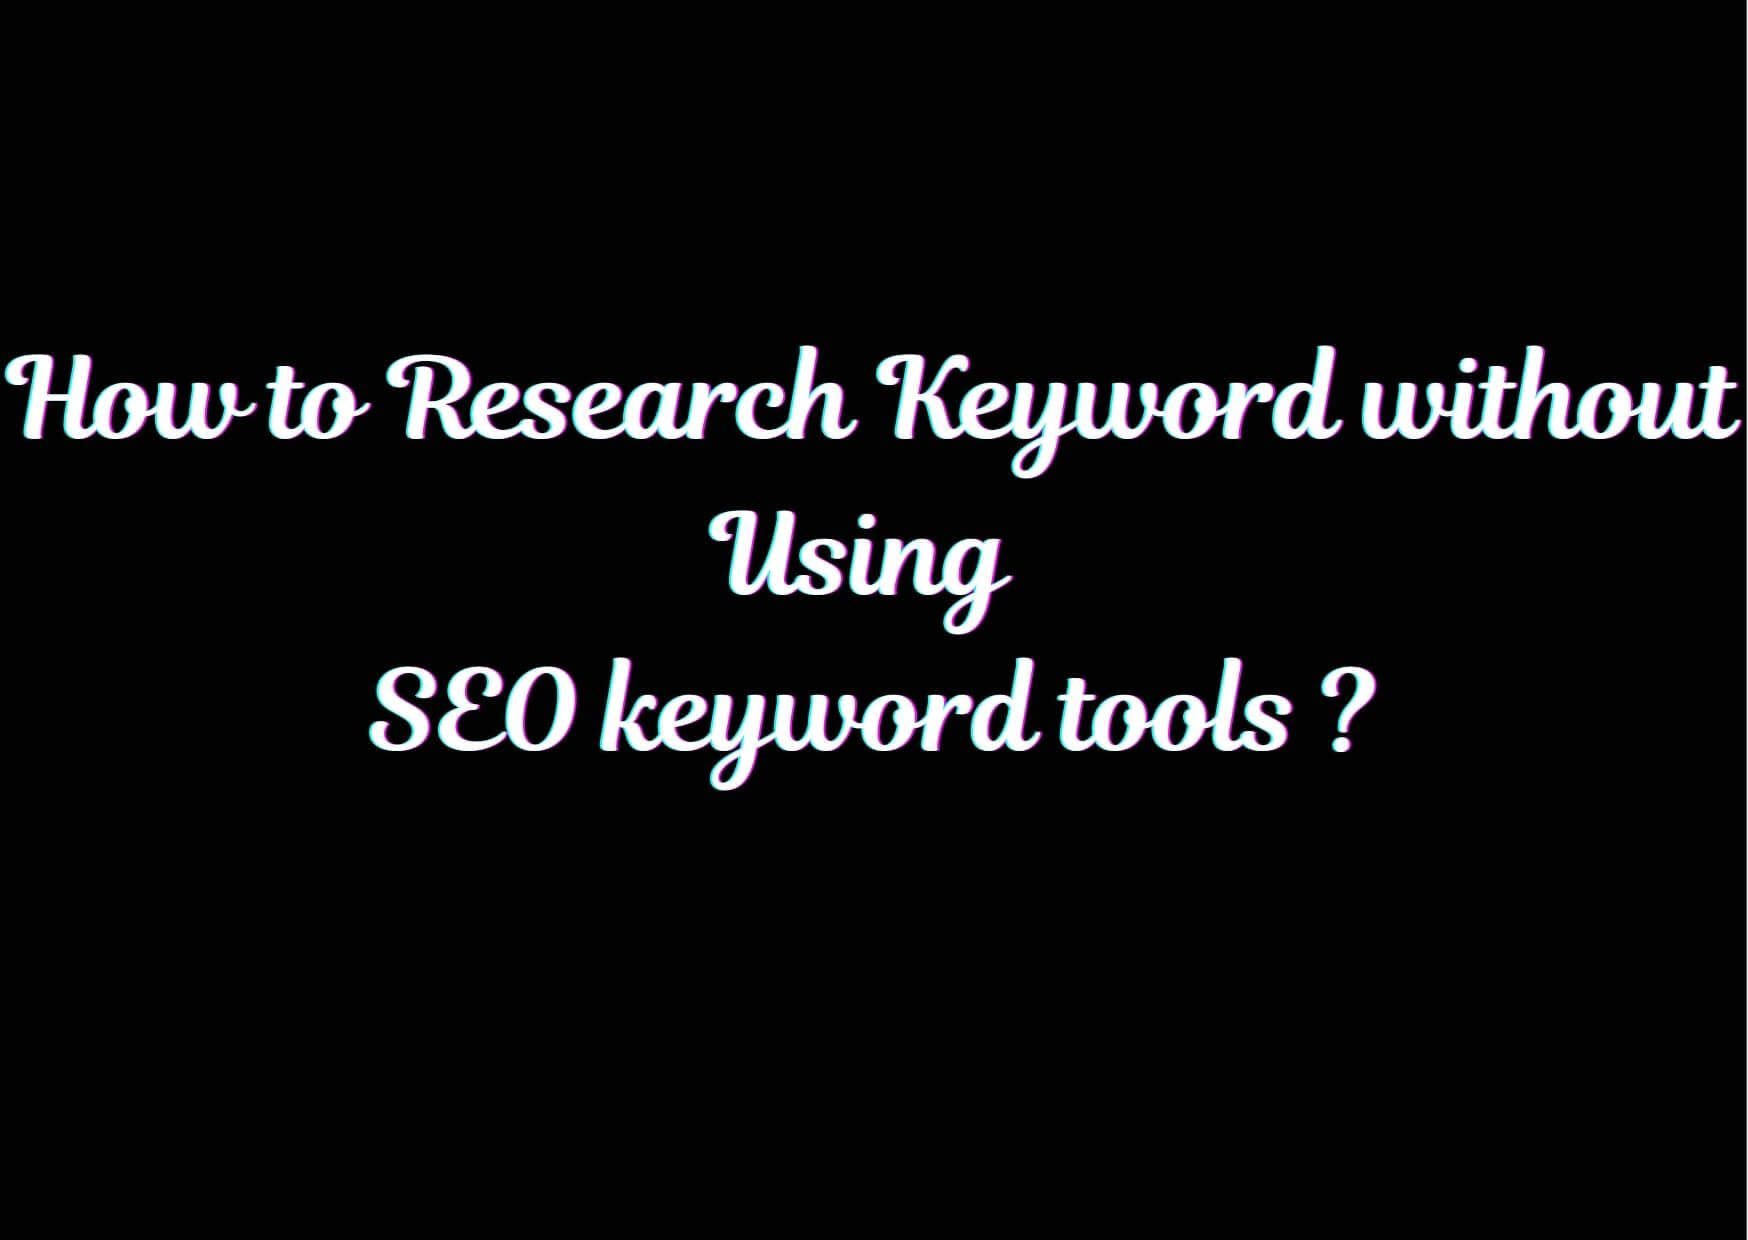 How to Research Keyword without Using SEO keyword tools?